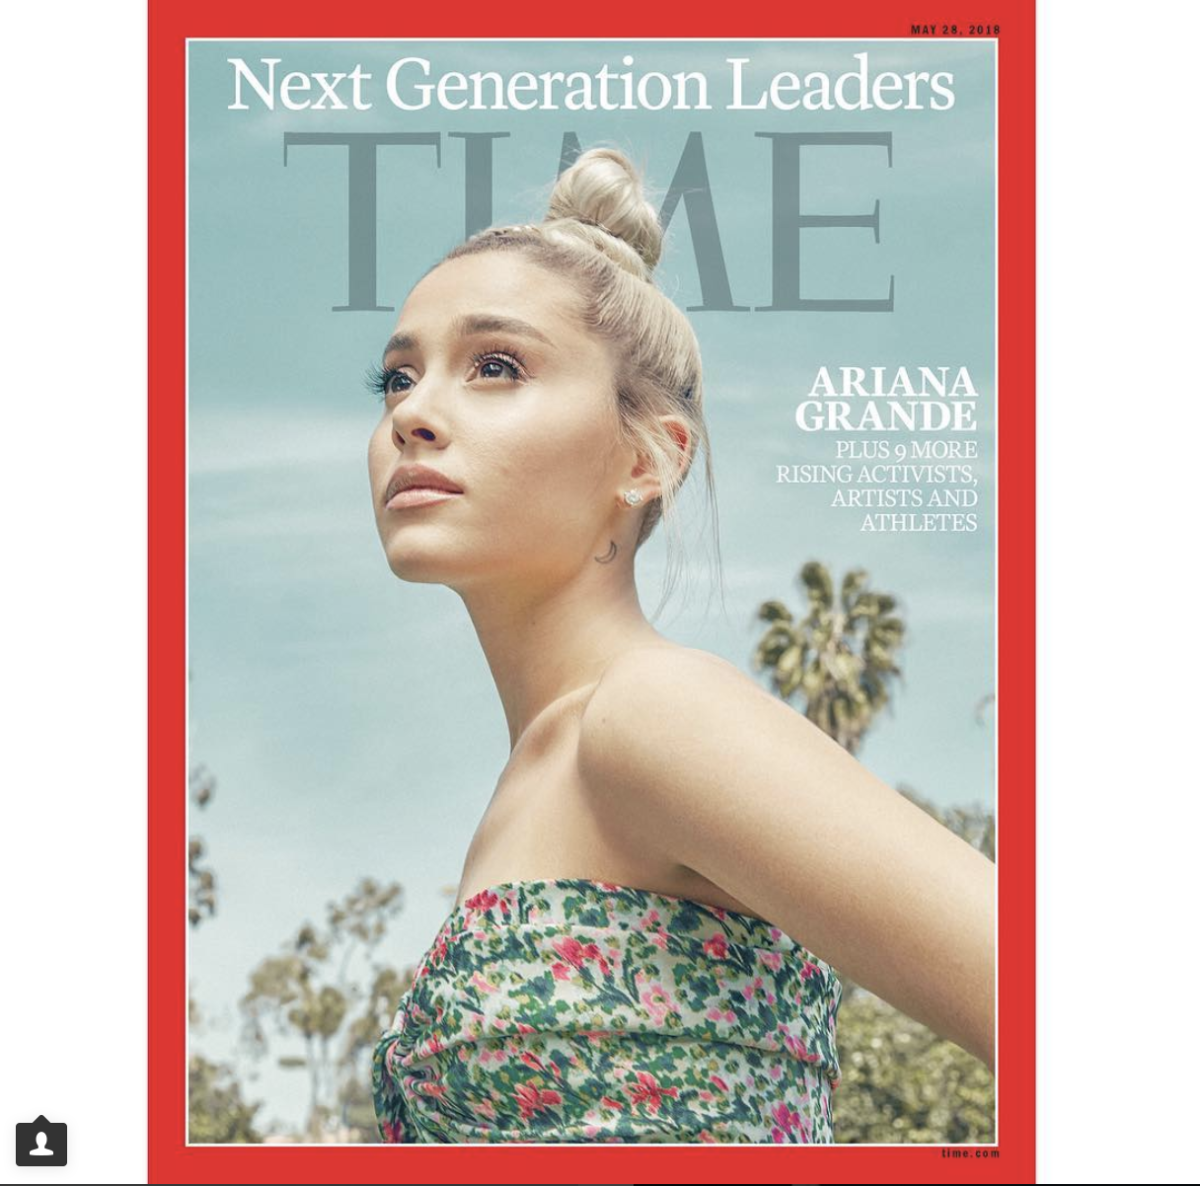 He shot photos for the cover of Time Magazine featuring Ariana Grande.